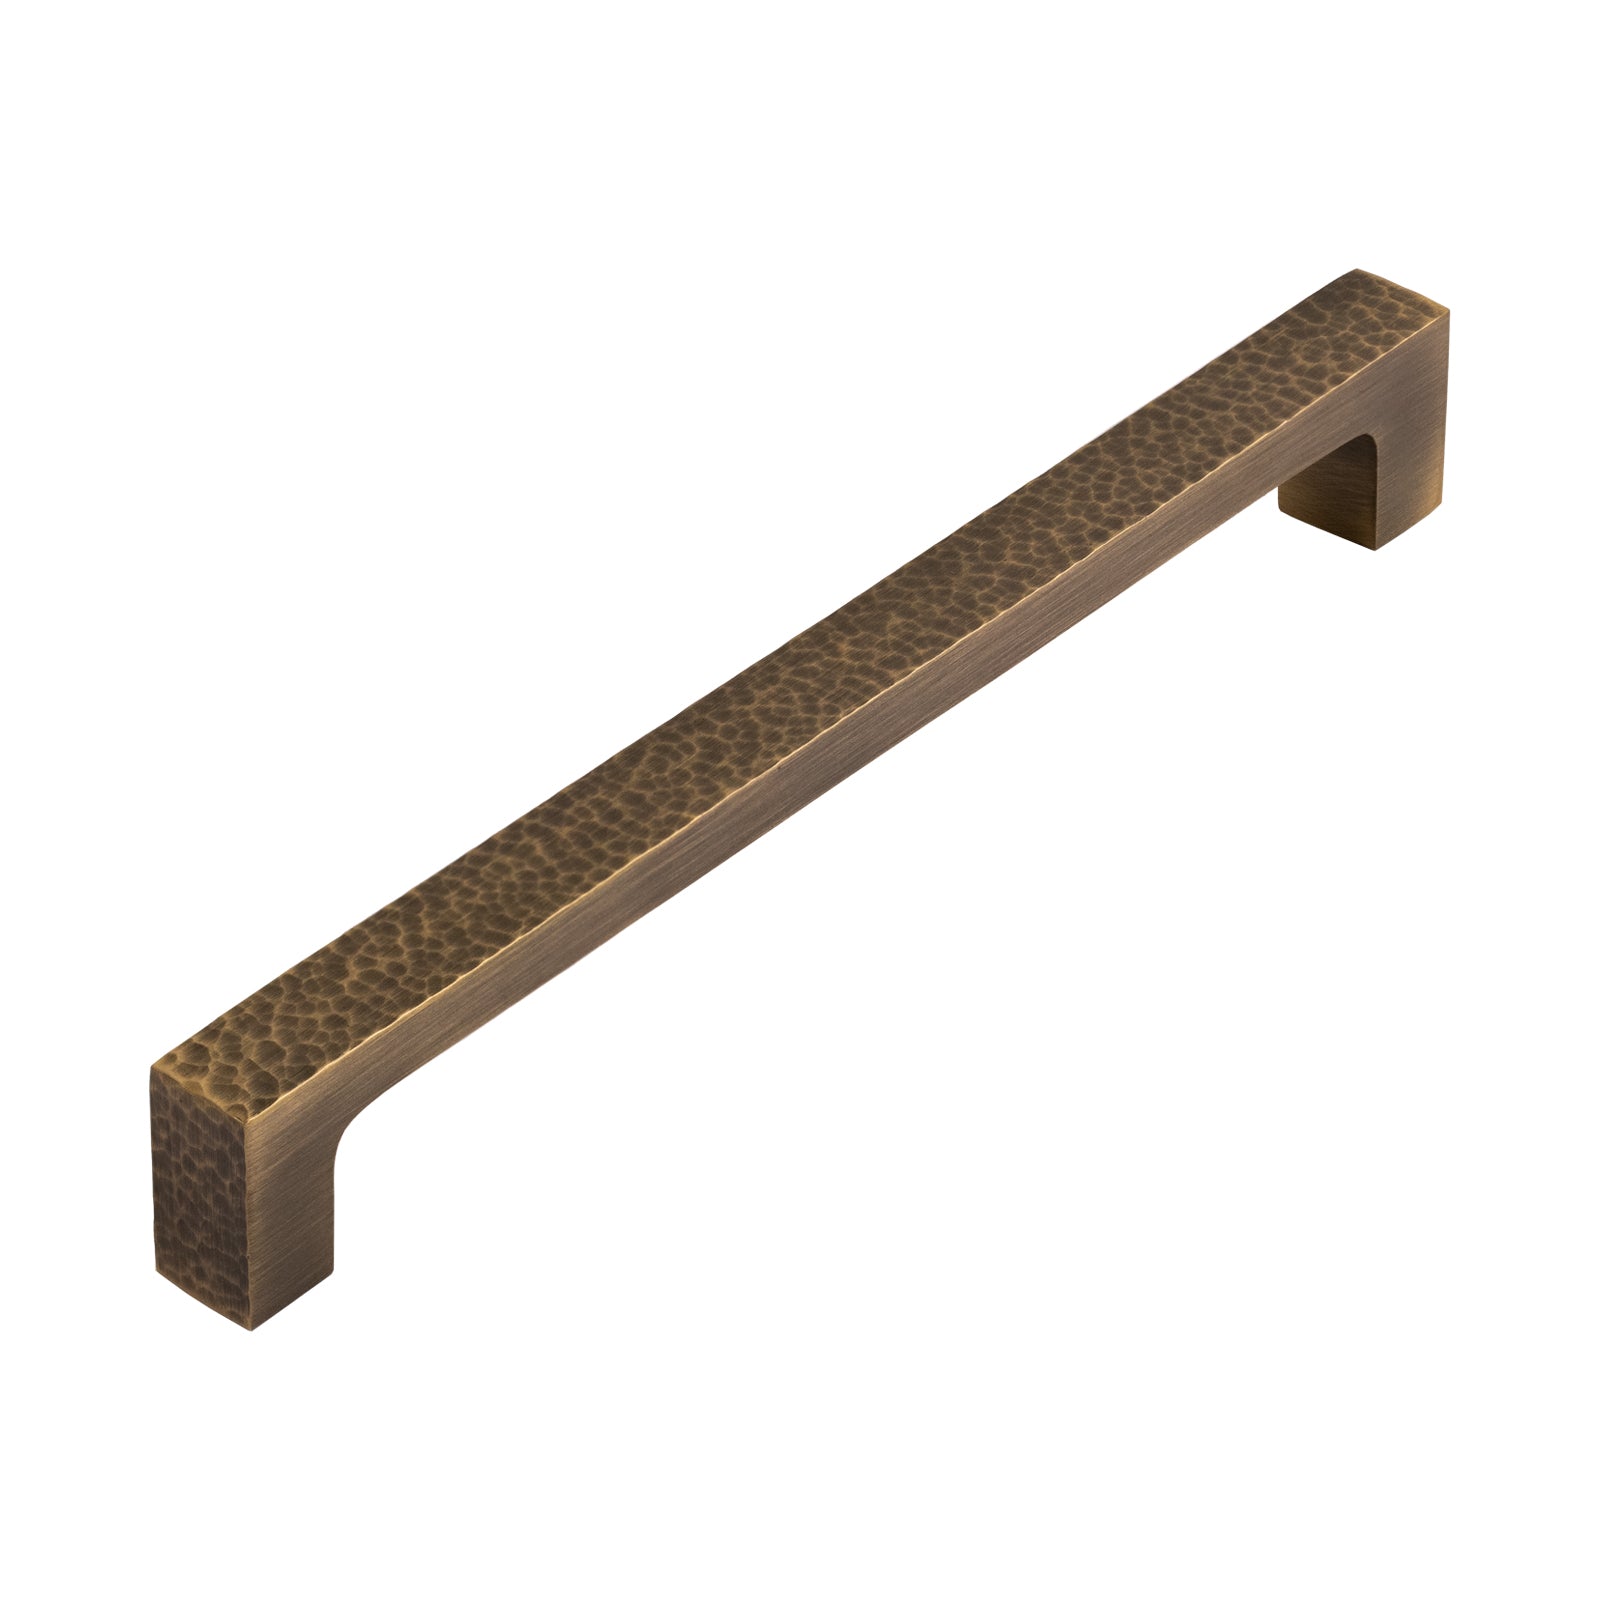 Hammered Square Pull Handles in Antique Brass 206mm SHOW